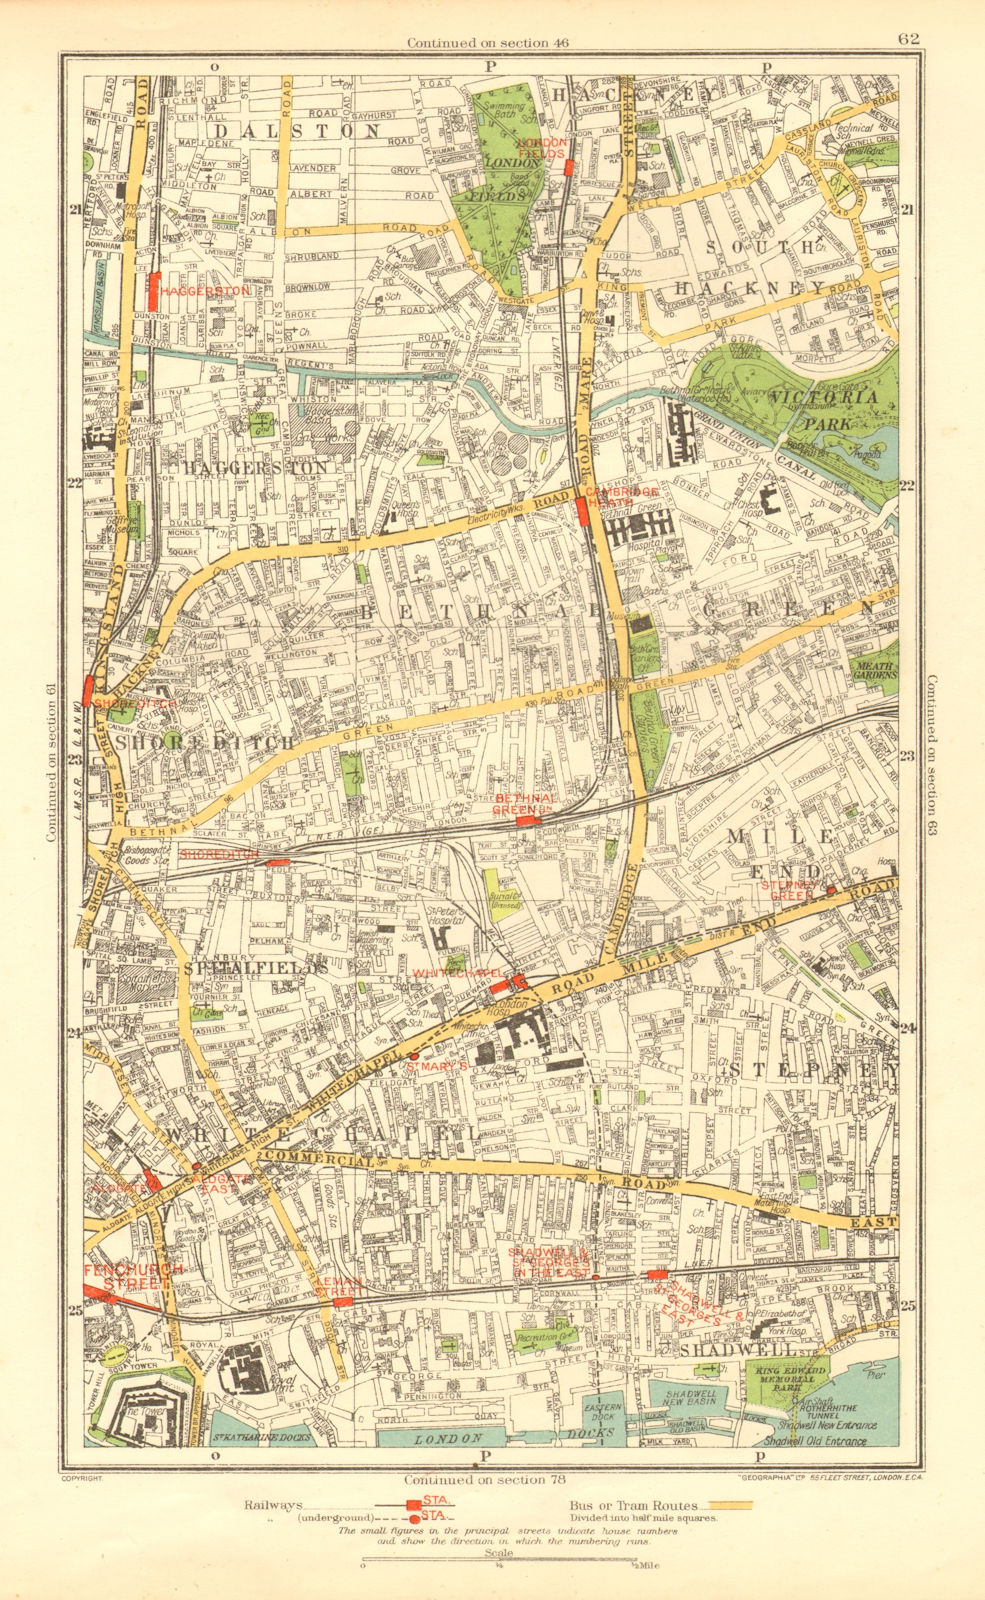 EAST END. Shoreditch Bethnal Green Stepney Hackney Mile End Haggerston 1937 map